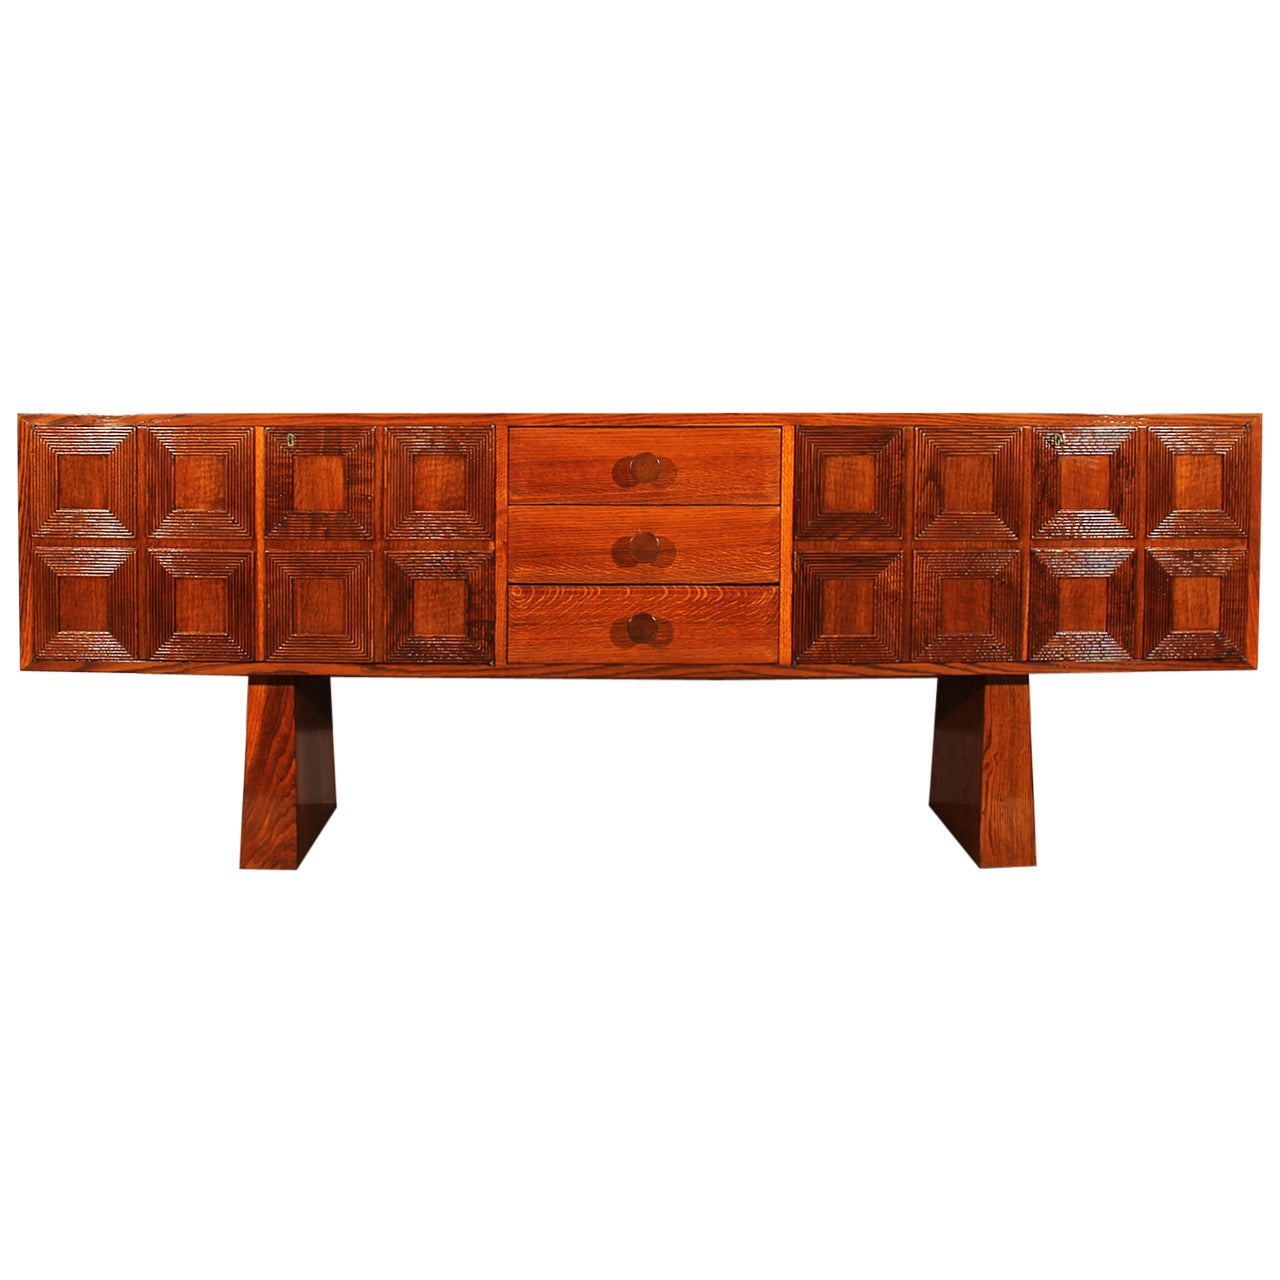 1940s Cubist Sideboard, Solid Oak and Veneer, Panels, Trapezoid Feet, Italy